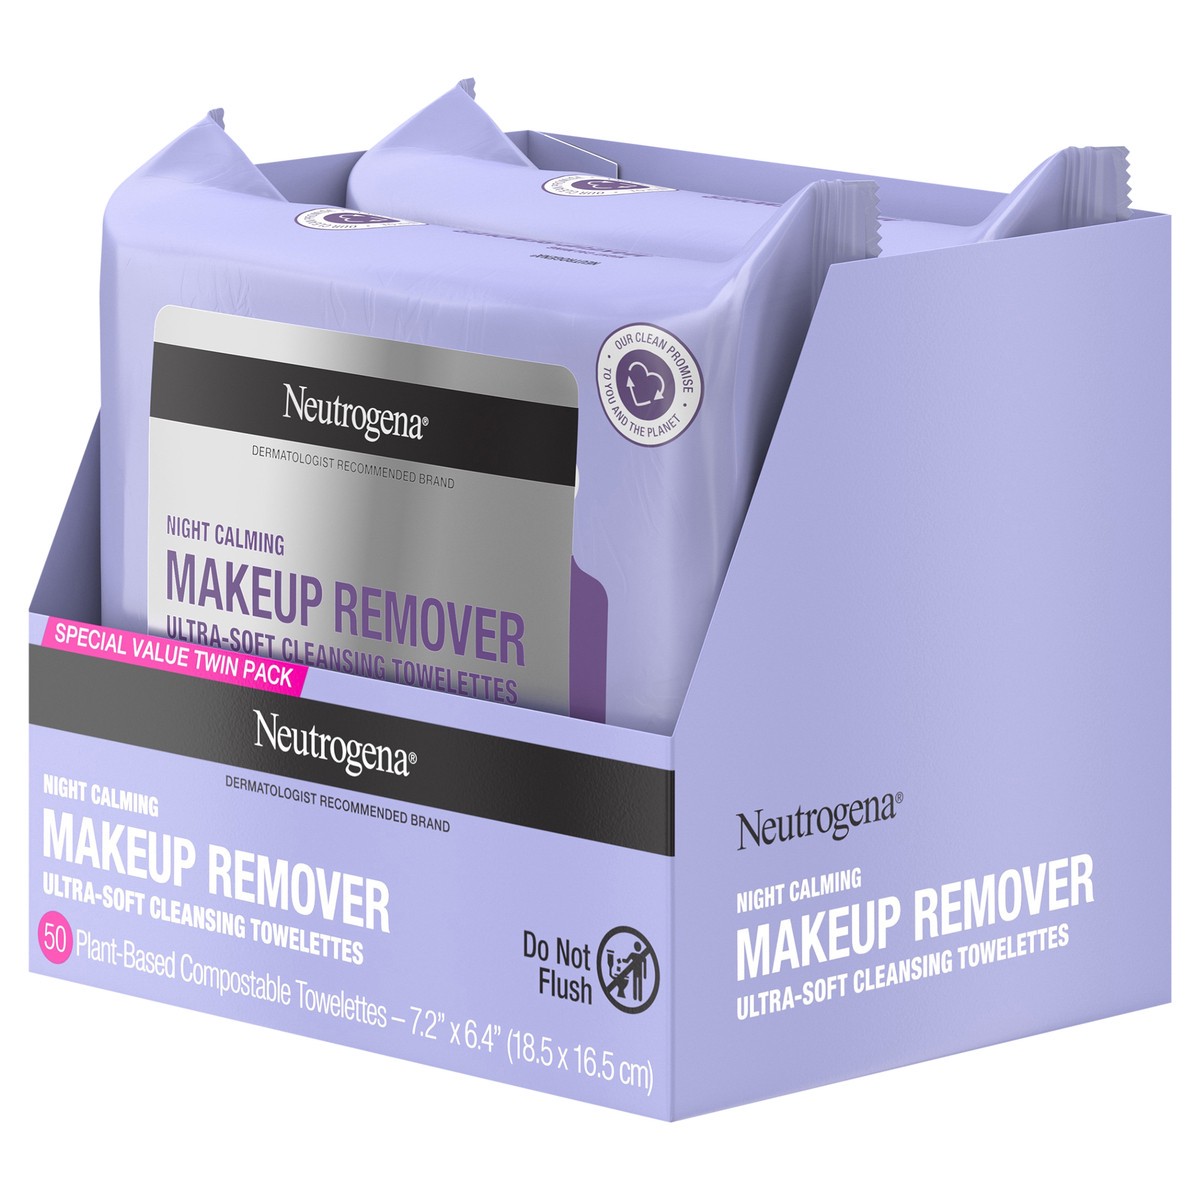 slide 2 of 7, Neutrogena Night Calming Makeup Remover Face Wipes, Nighttime Cleansing Towelettes Remove Sweat, Dirt & Makeup & Calms Skin, Hypoallergenic, 100% Plant Based Cloth, Twin Pack, 2 x 25 ct, 50 ct